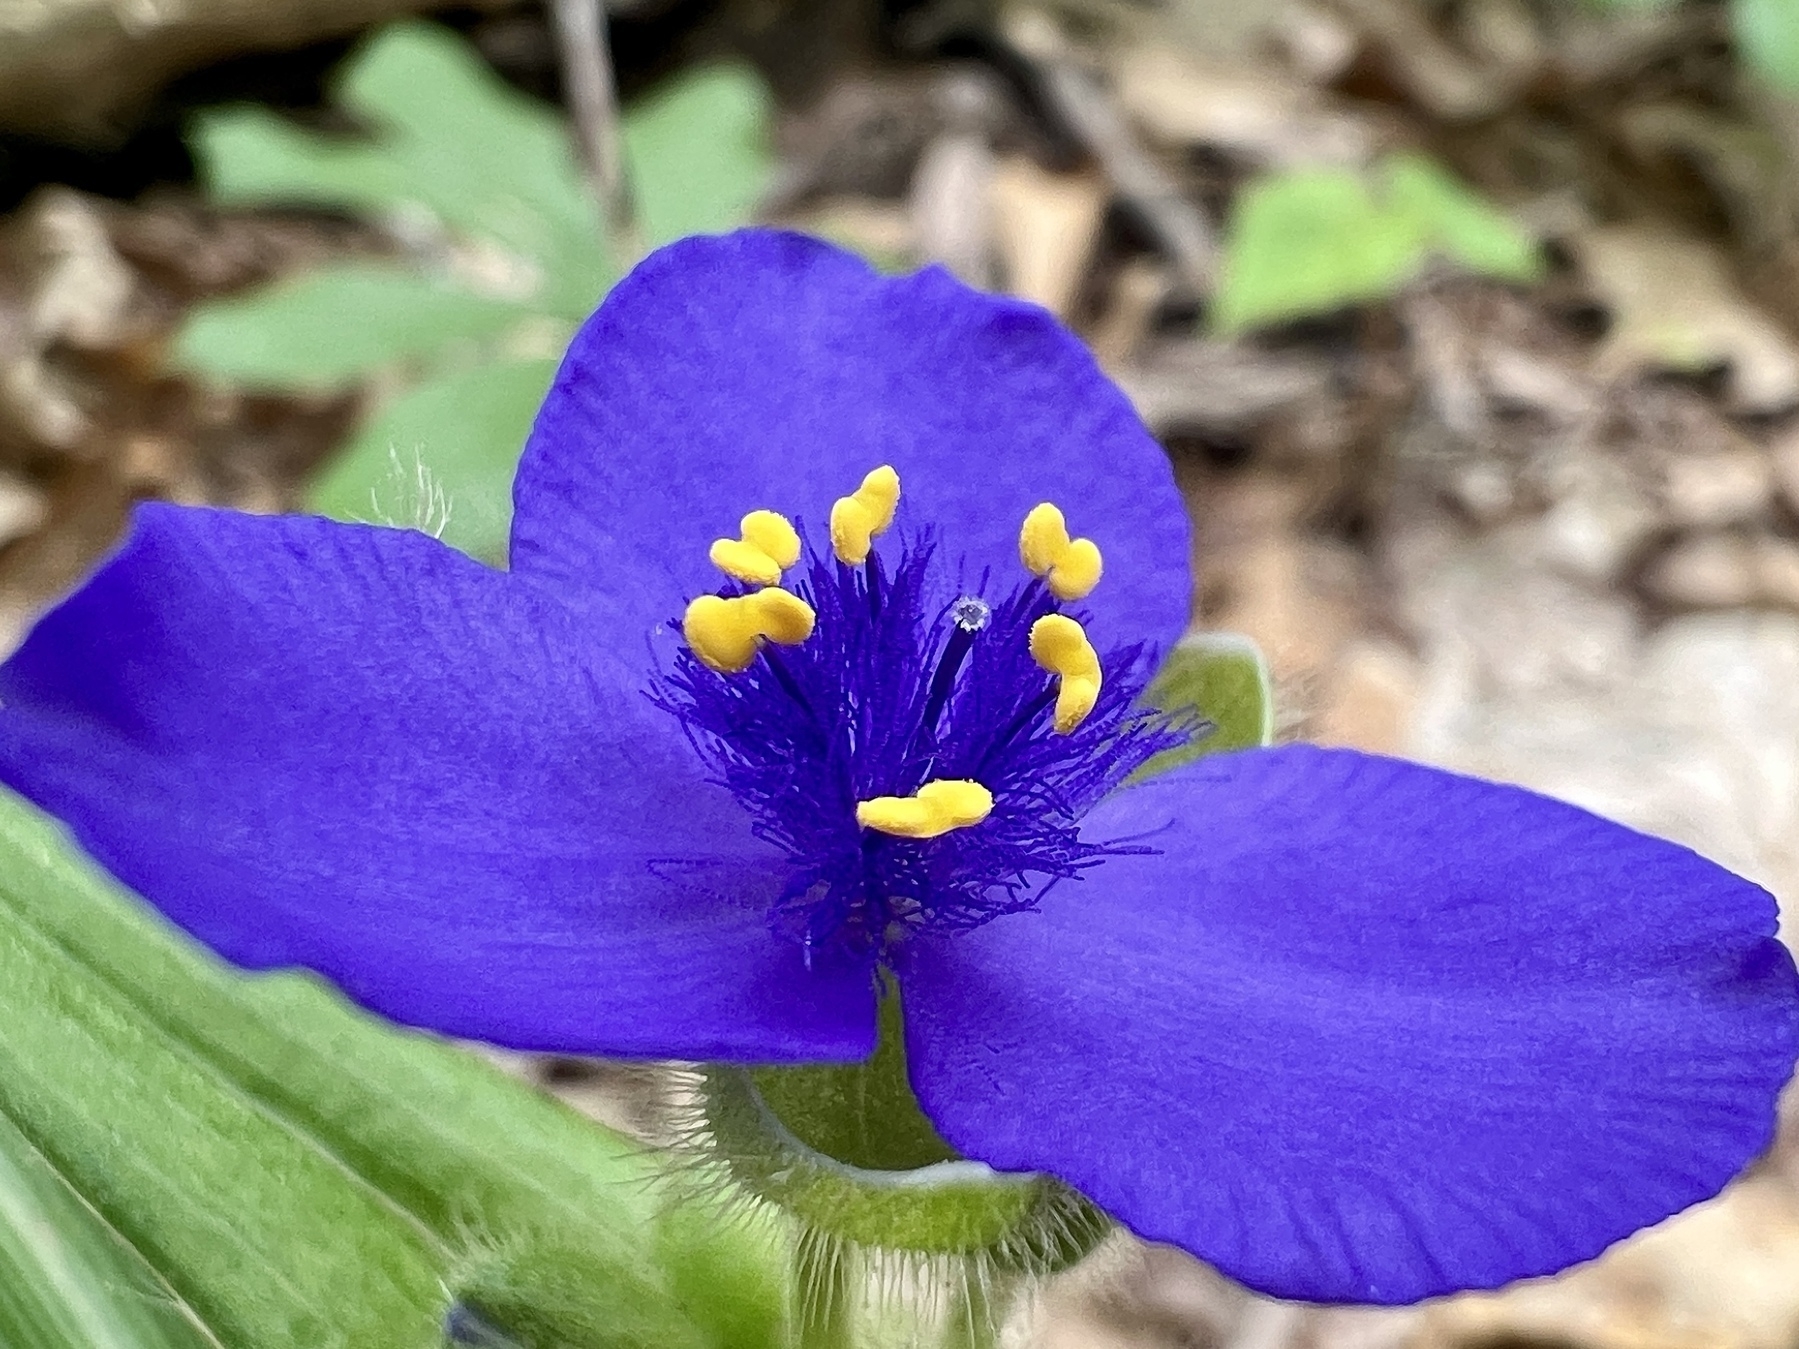 A vibrant purple flower with 3 petals and bright yellow anthers